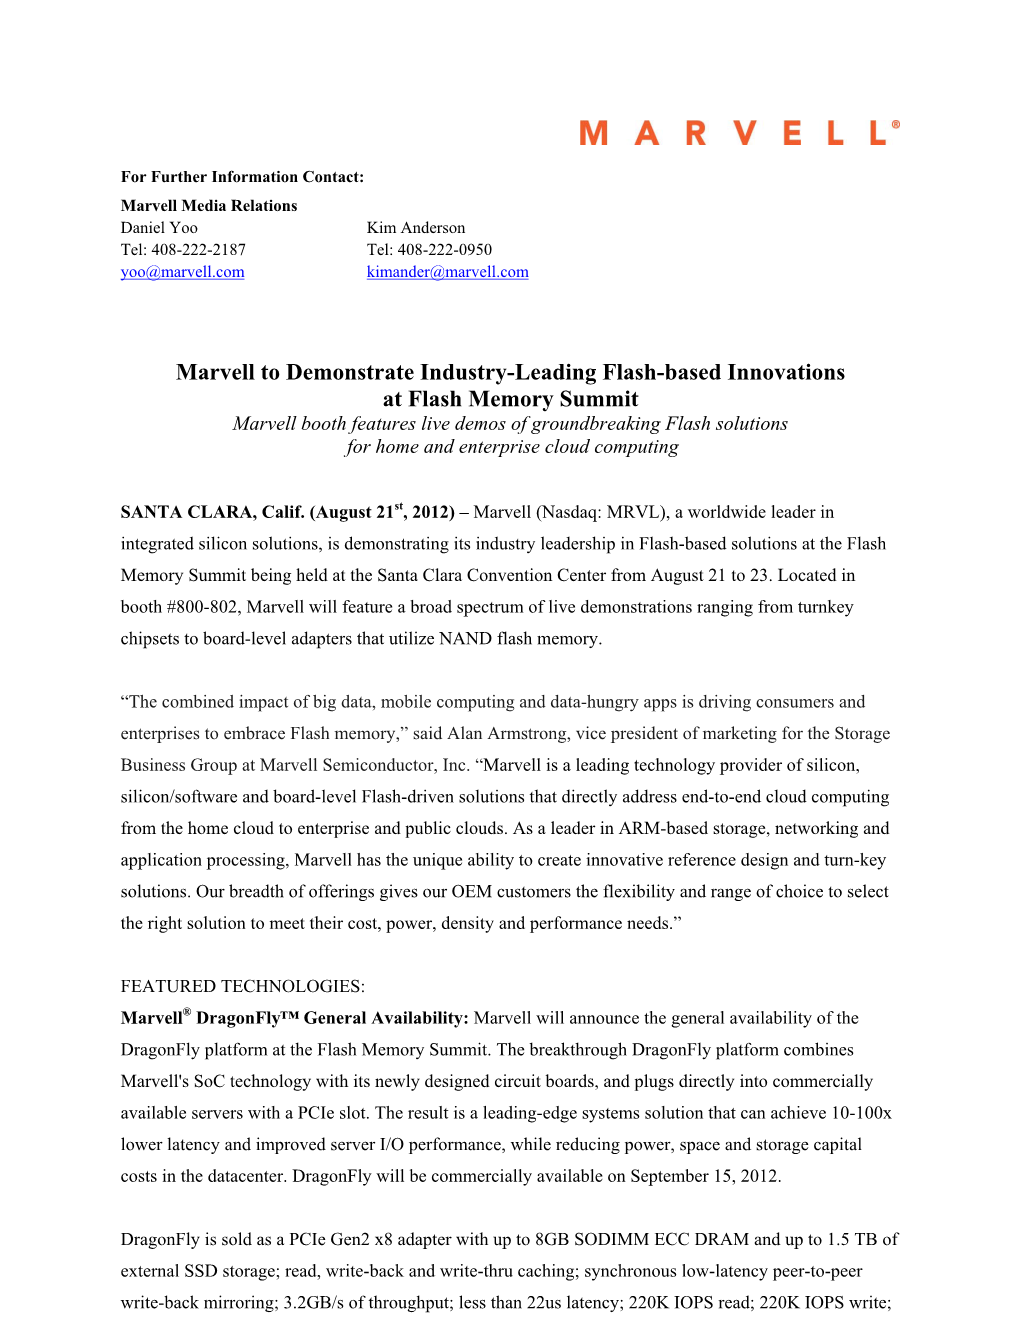 Marvell to Demonstrate Industry-Leading Flash-Based